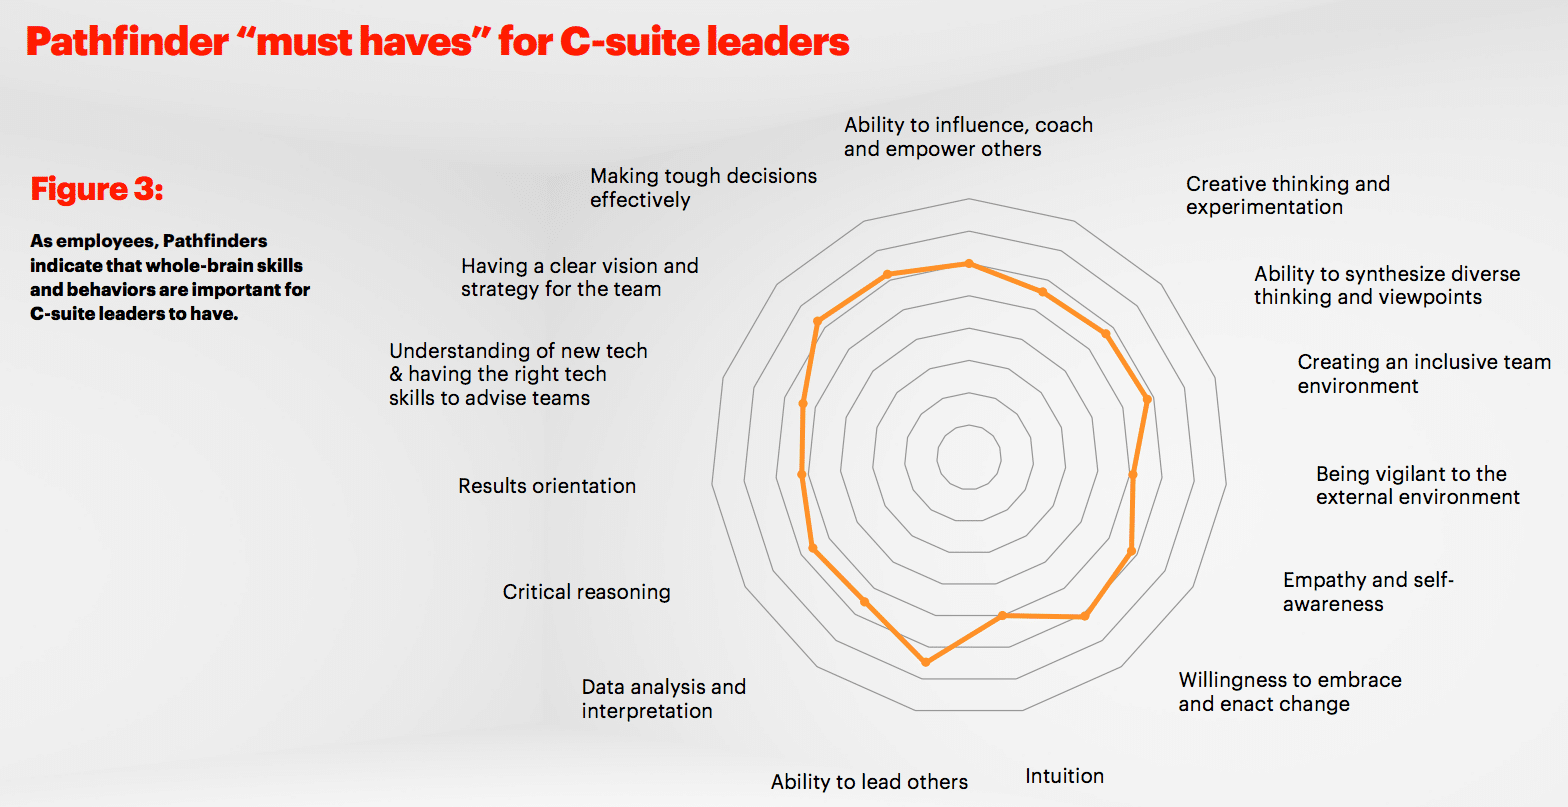 Why the C-suite need a new leadership approach to engage stakeholder ‘supergroup’